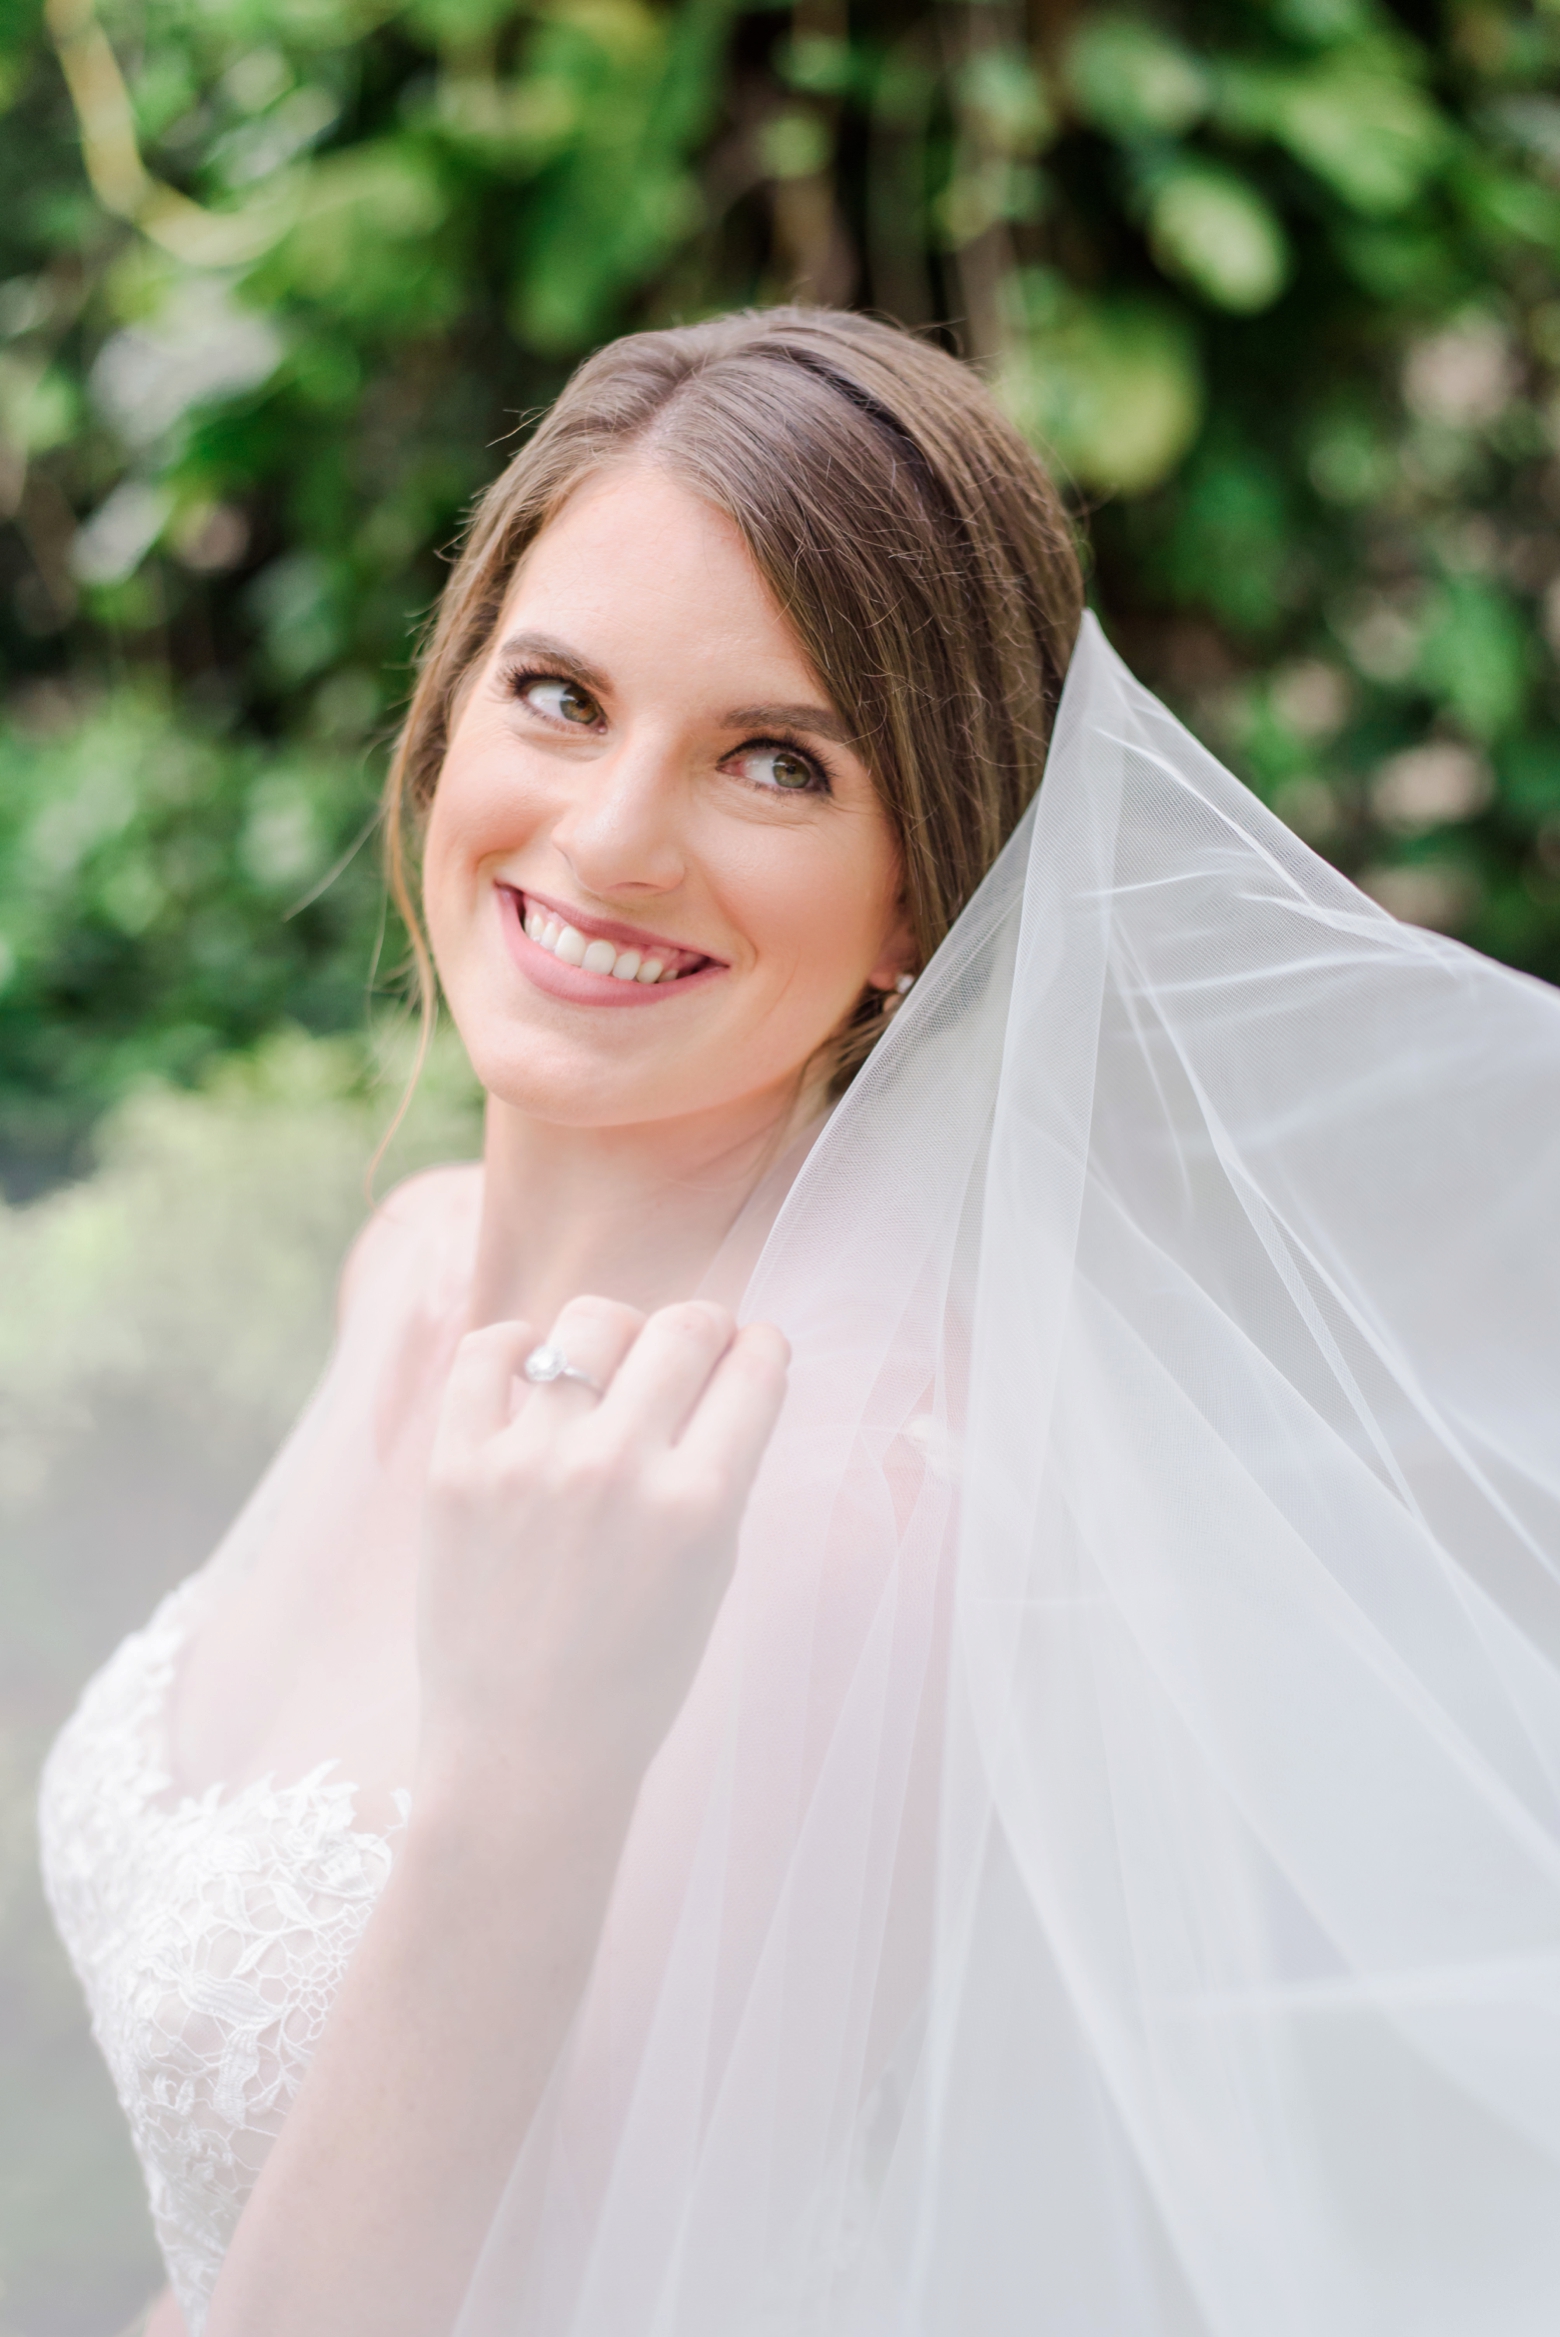 Bride shows off her engagement ring while holding her veil